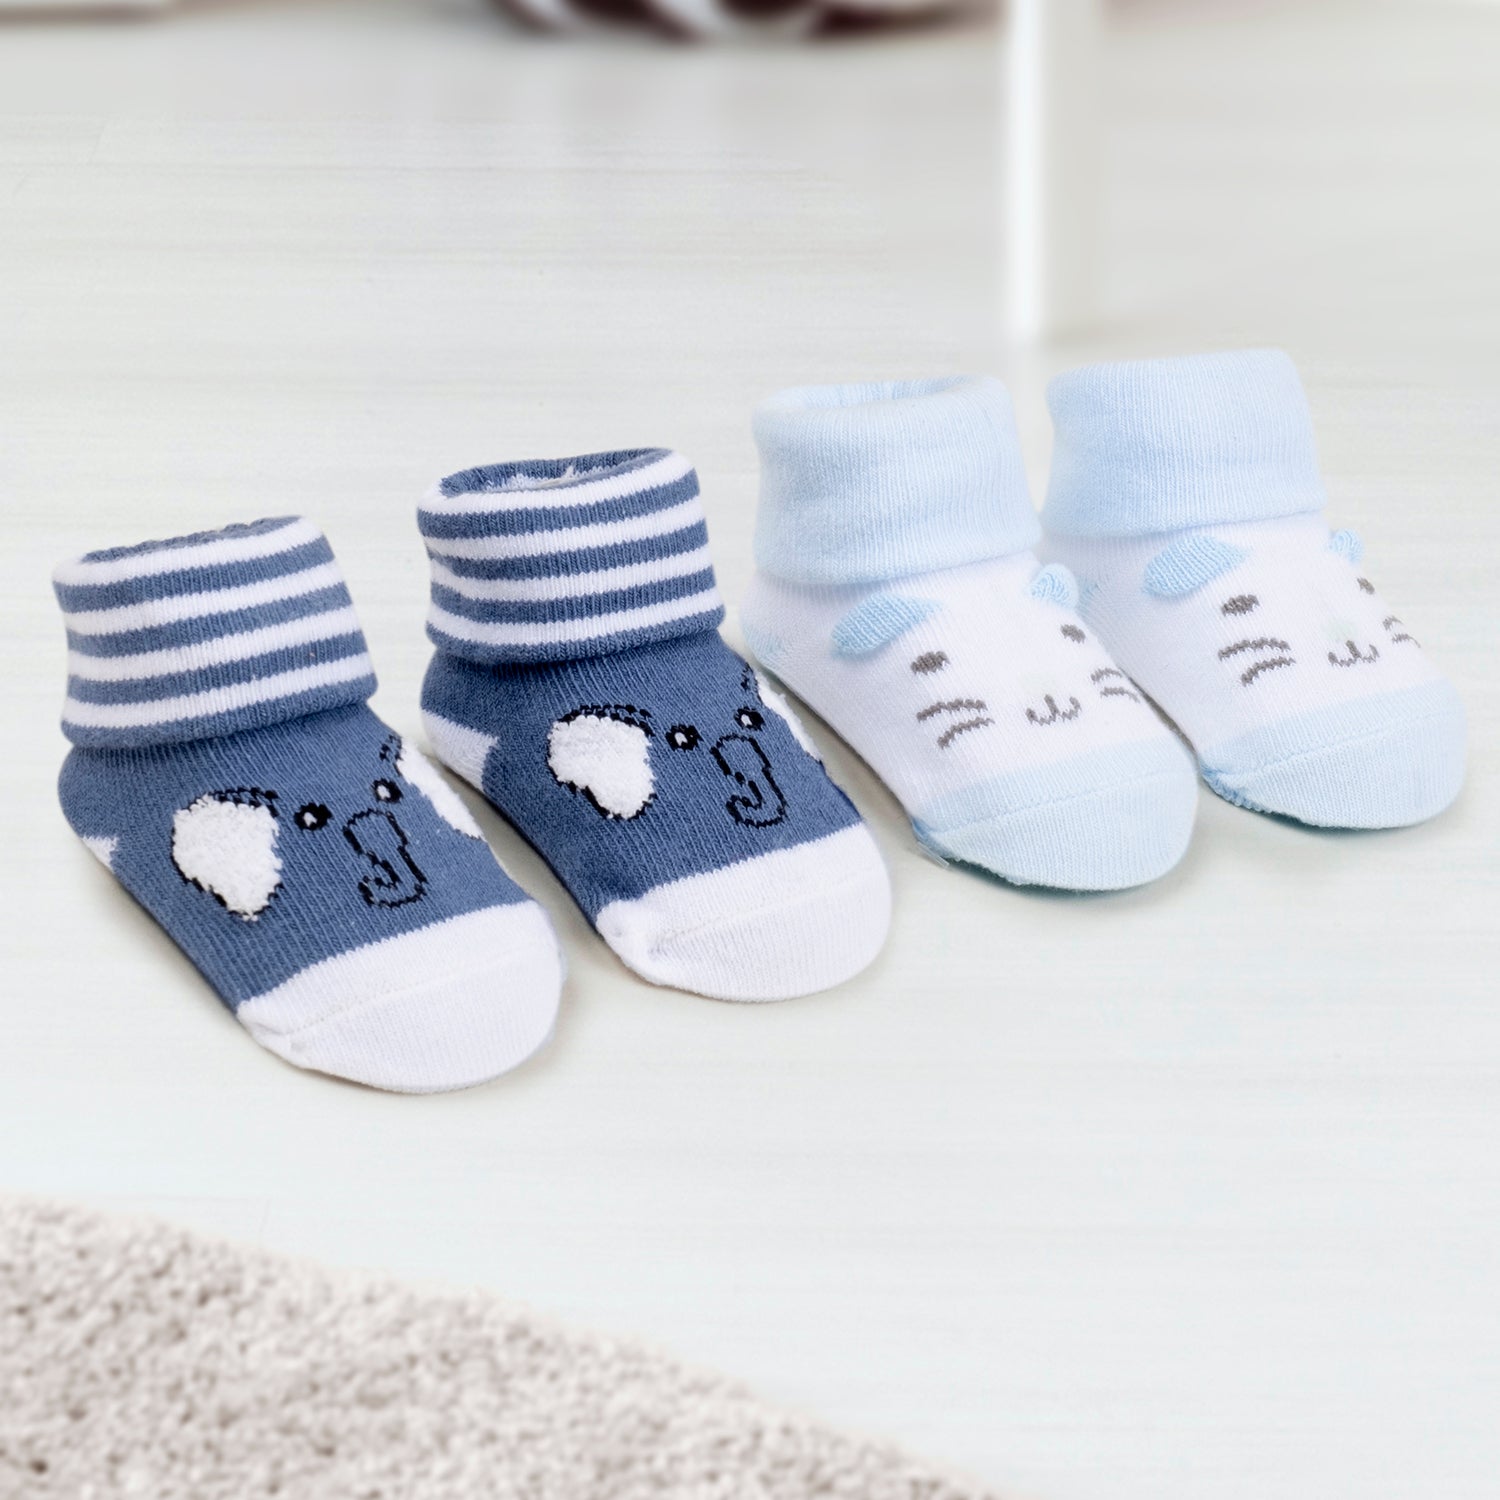 Baby Moo 3D Elephant Kitty Cotton Ankle Length Infant Dress Up Walking Set of 2 Socks Booties - Blue